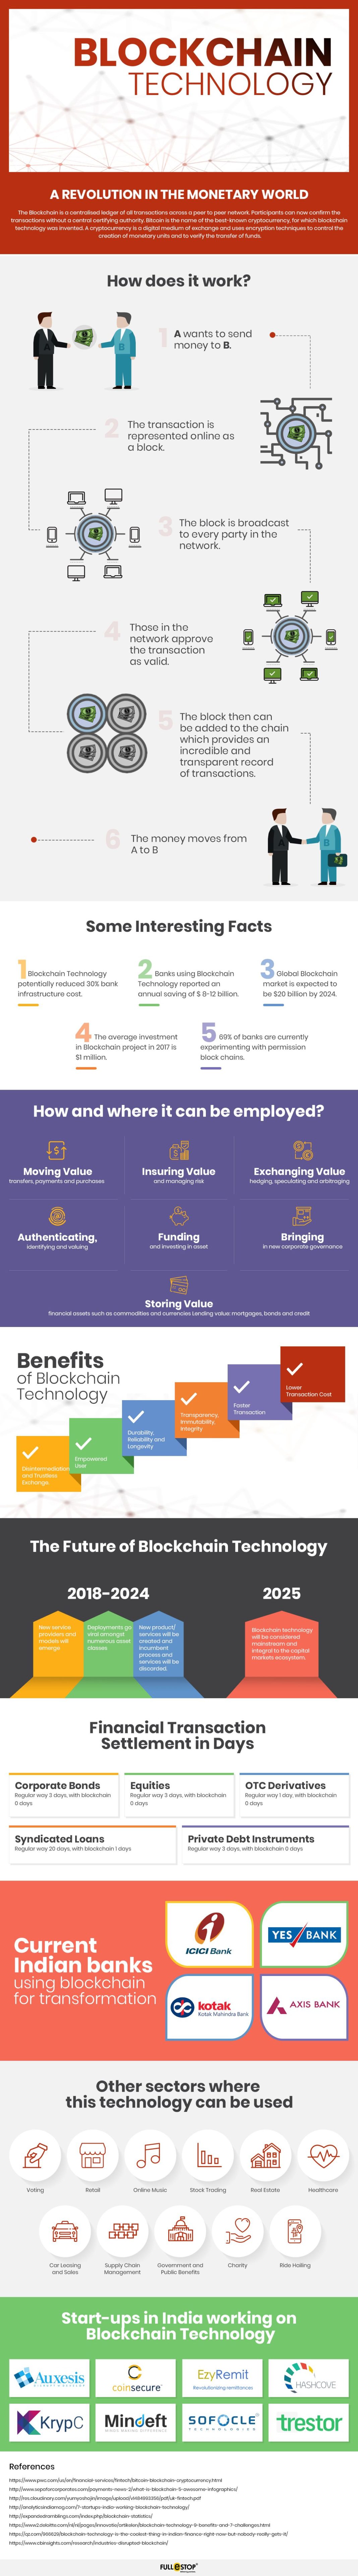 How Blockchain Technology Works [Infographic]